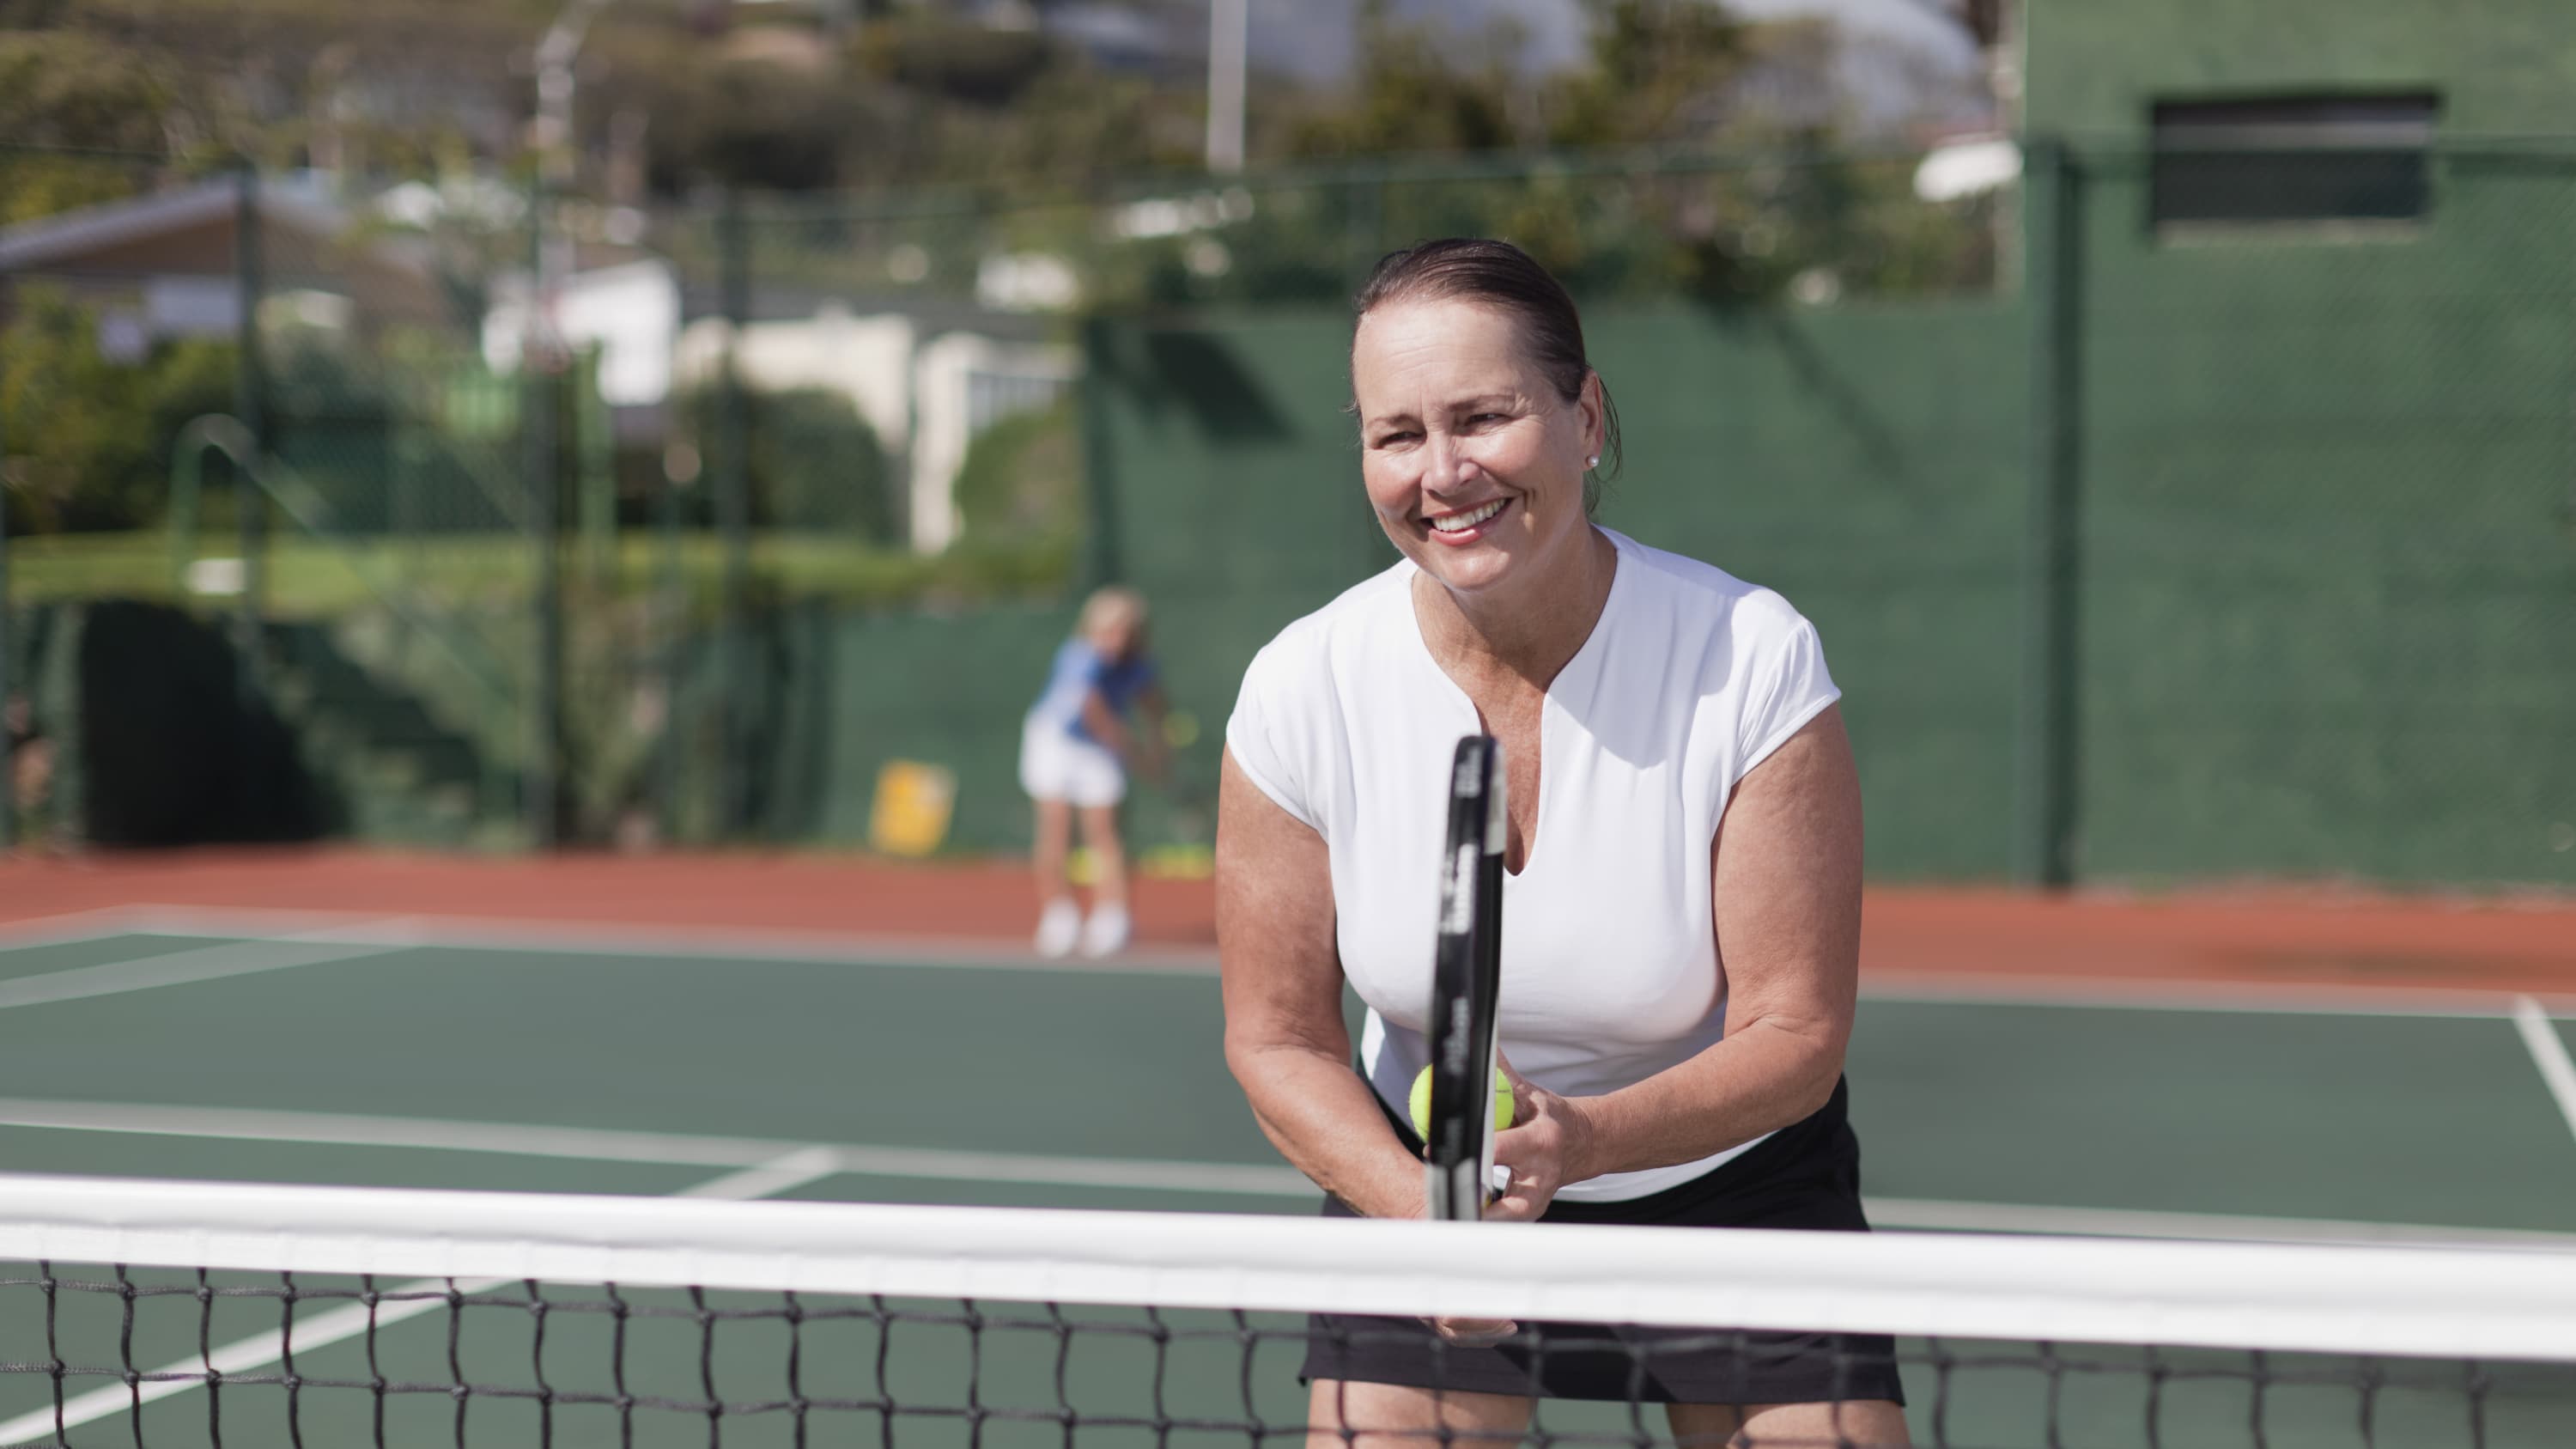 A woman back to enjoying her favorite activity of tennis after being treated for structural heart disease.